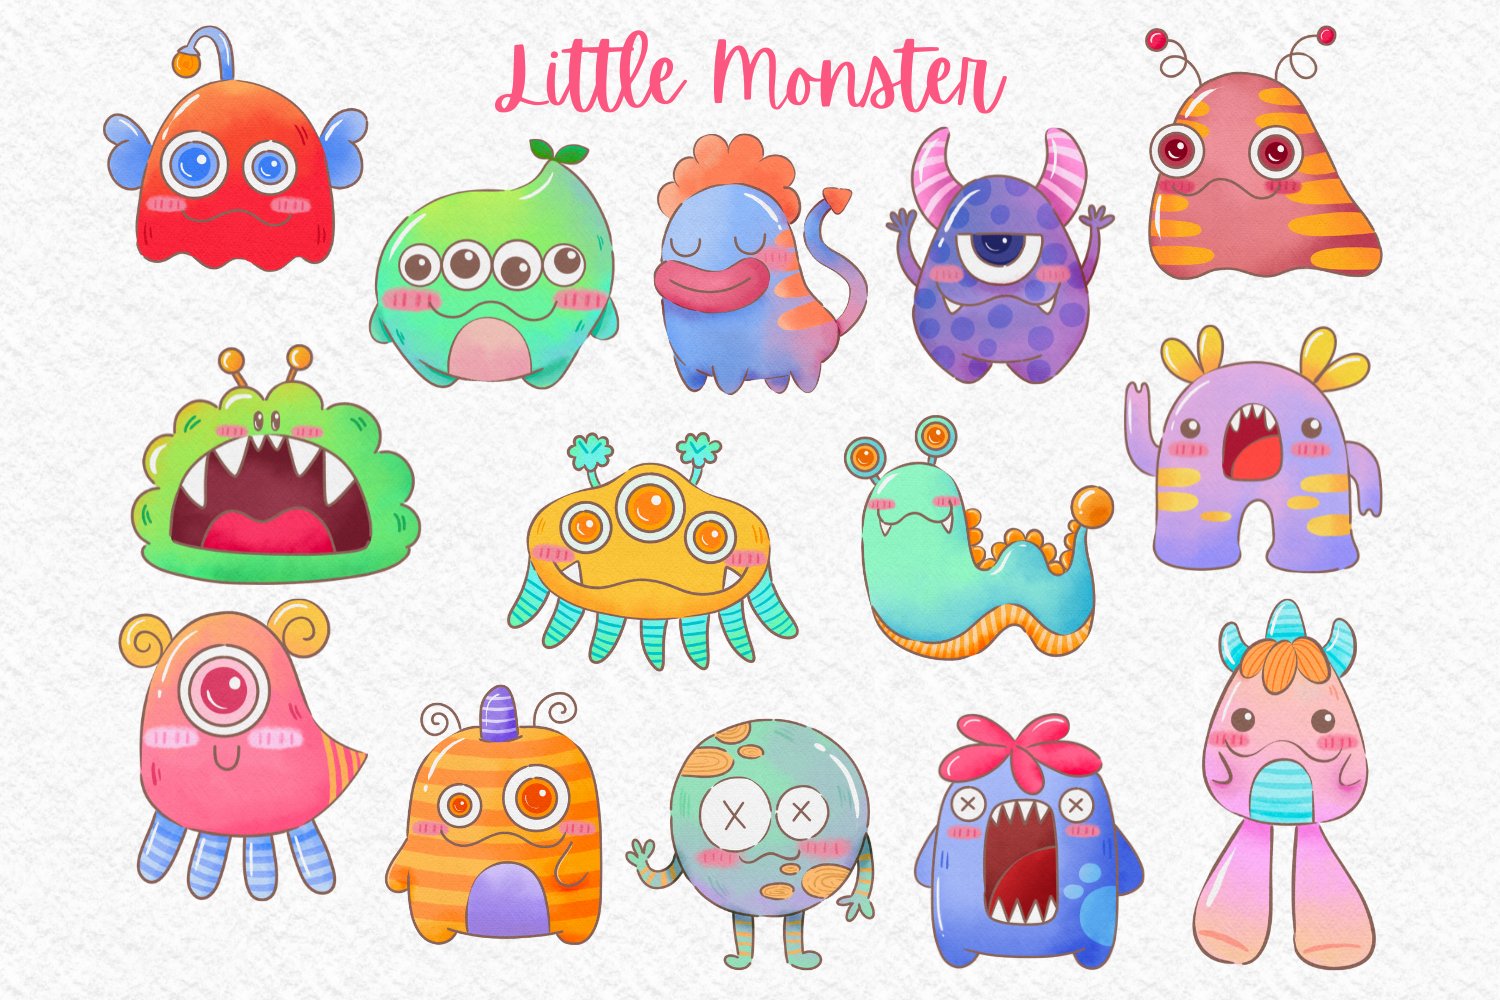 Little Monster watercolor clipart preview image.